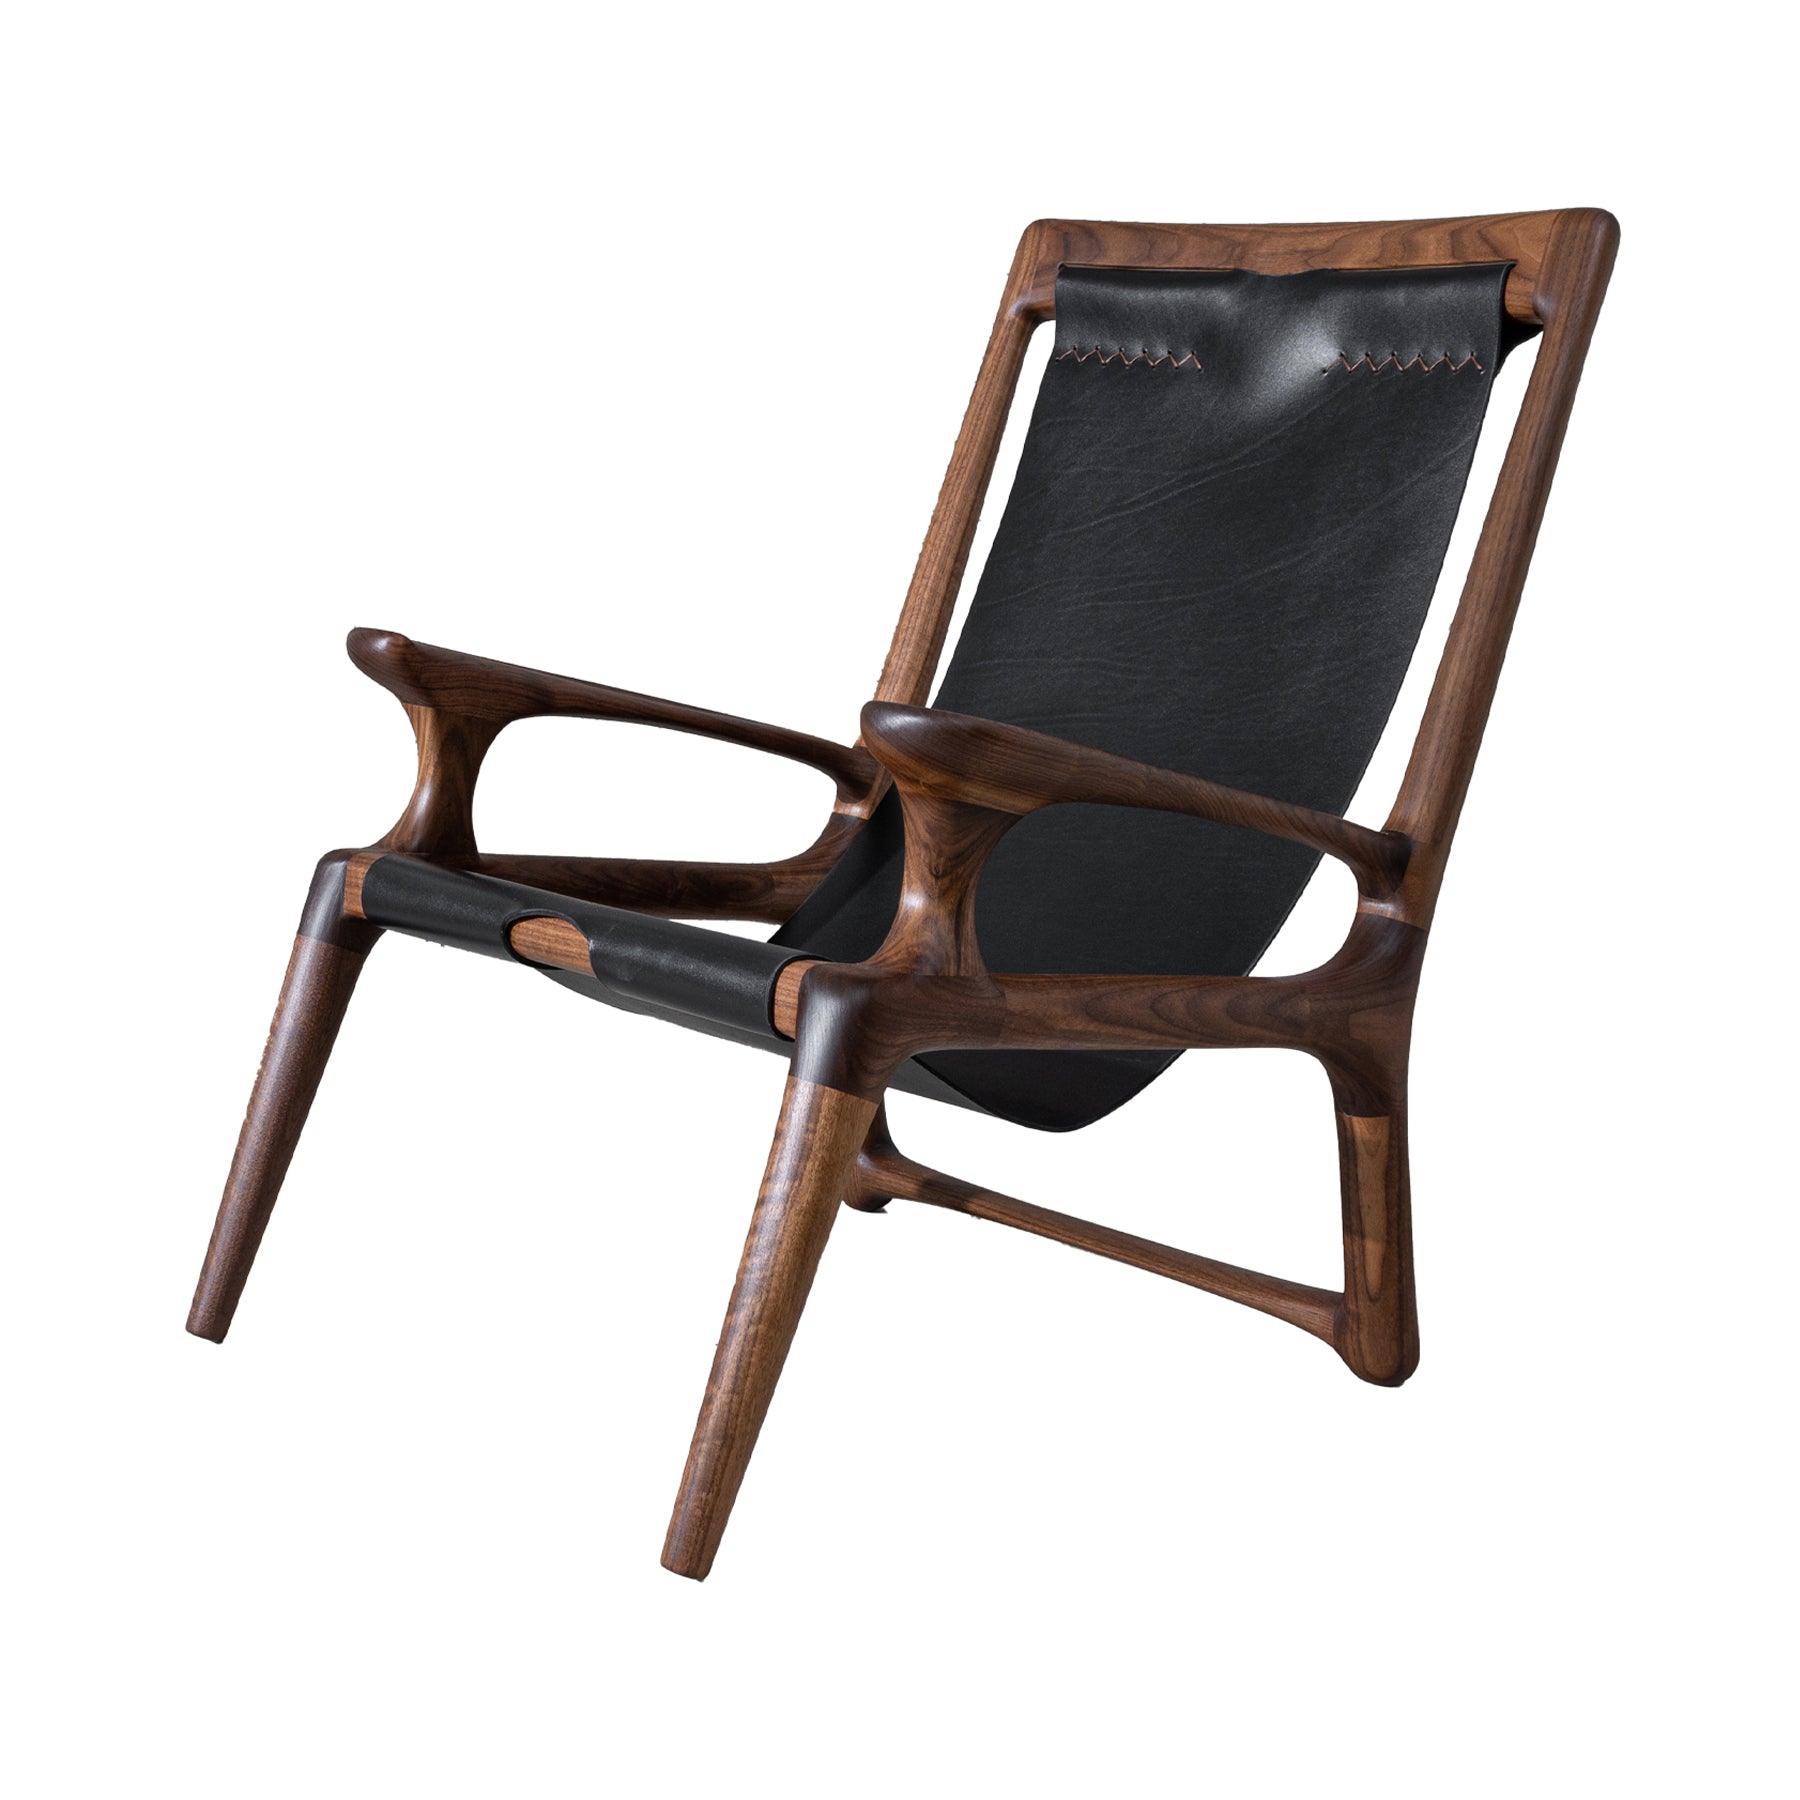 The Sling Chair: Walnut + Attached Arm + Black